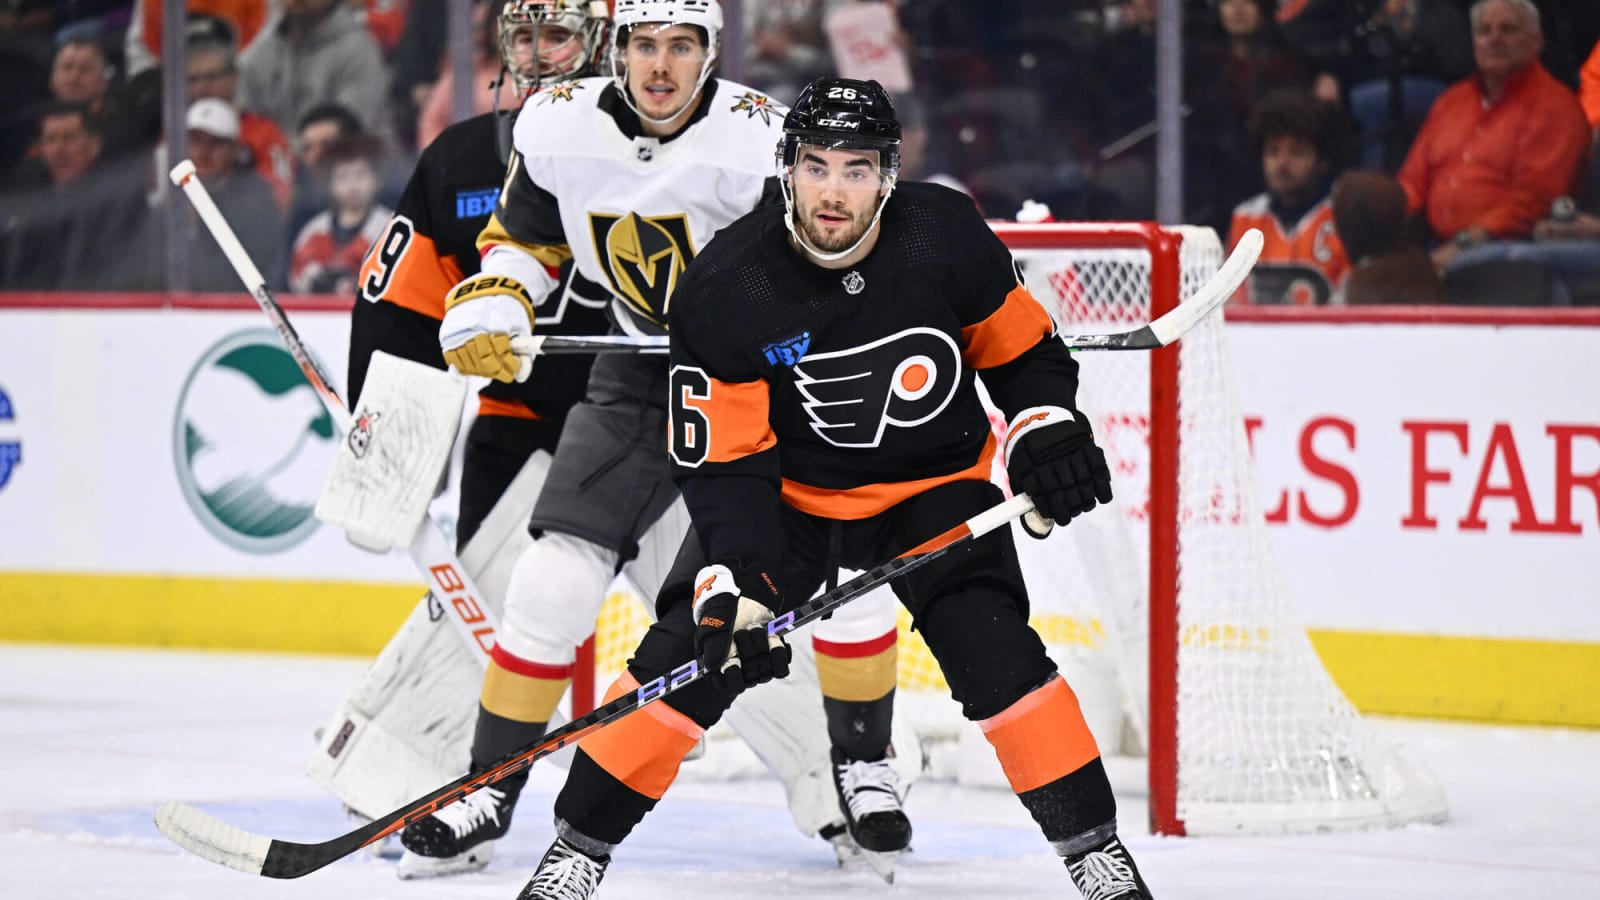 Trade Target: Flyers defenseman Sean Walker checks a lot of boxes for the Maple Leafs